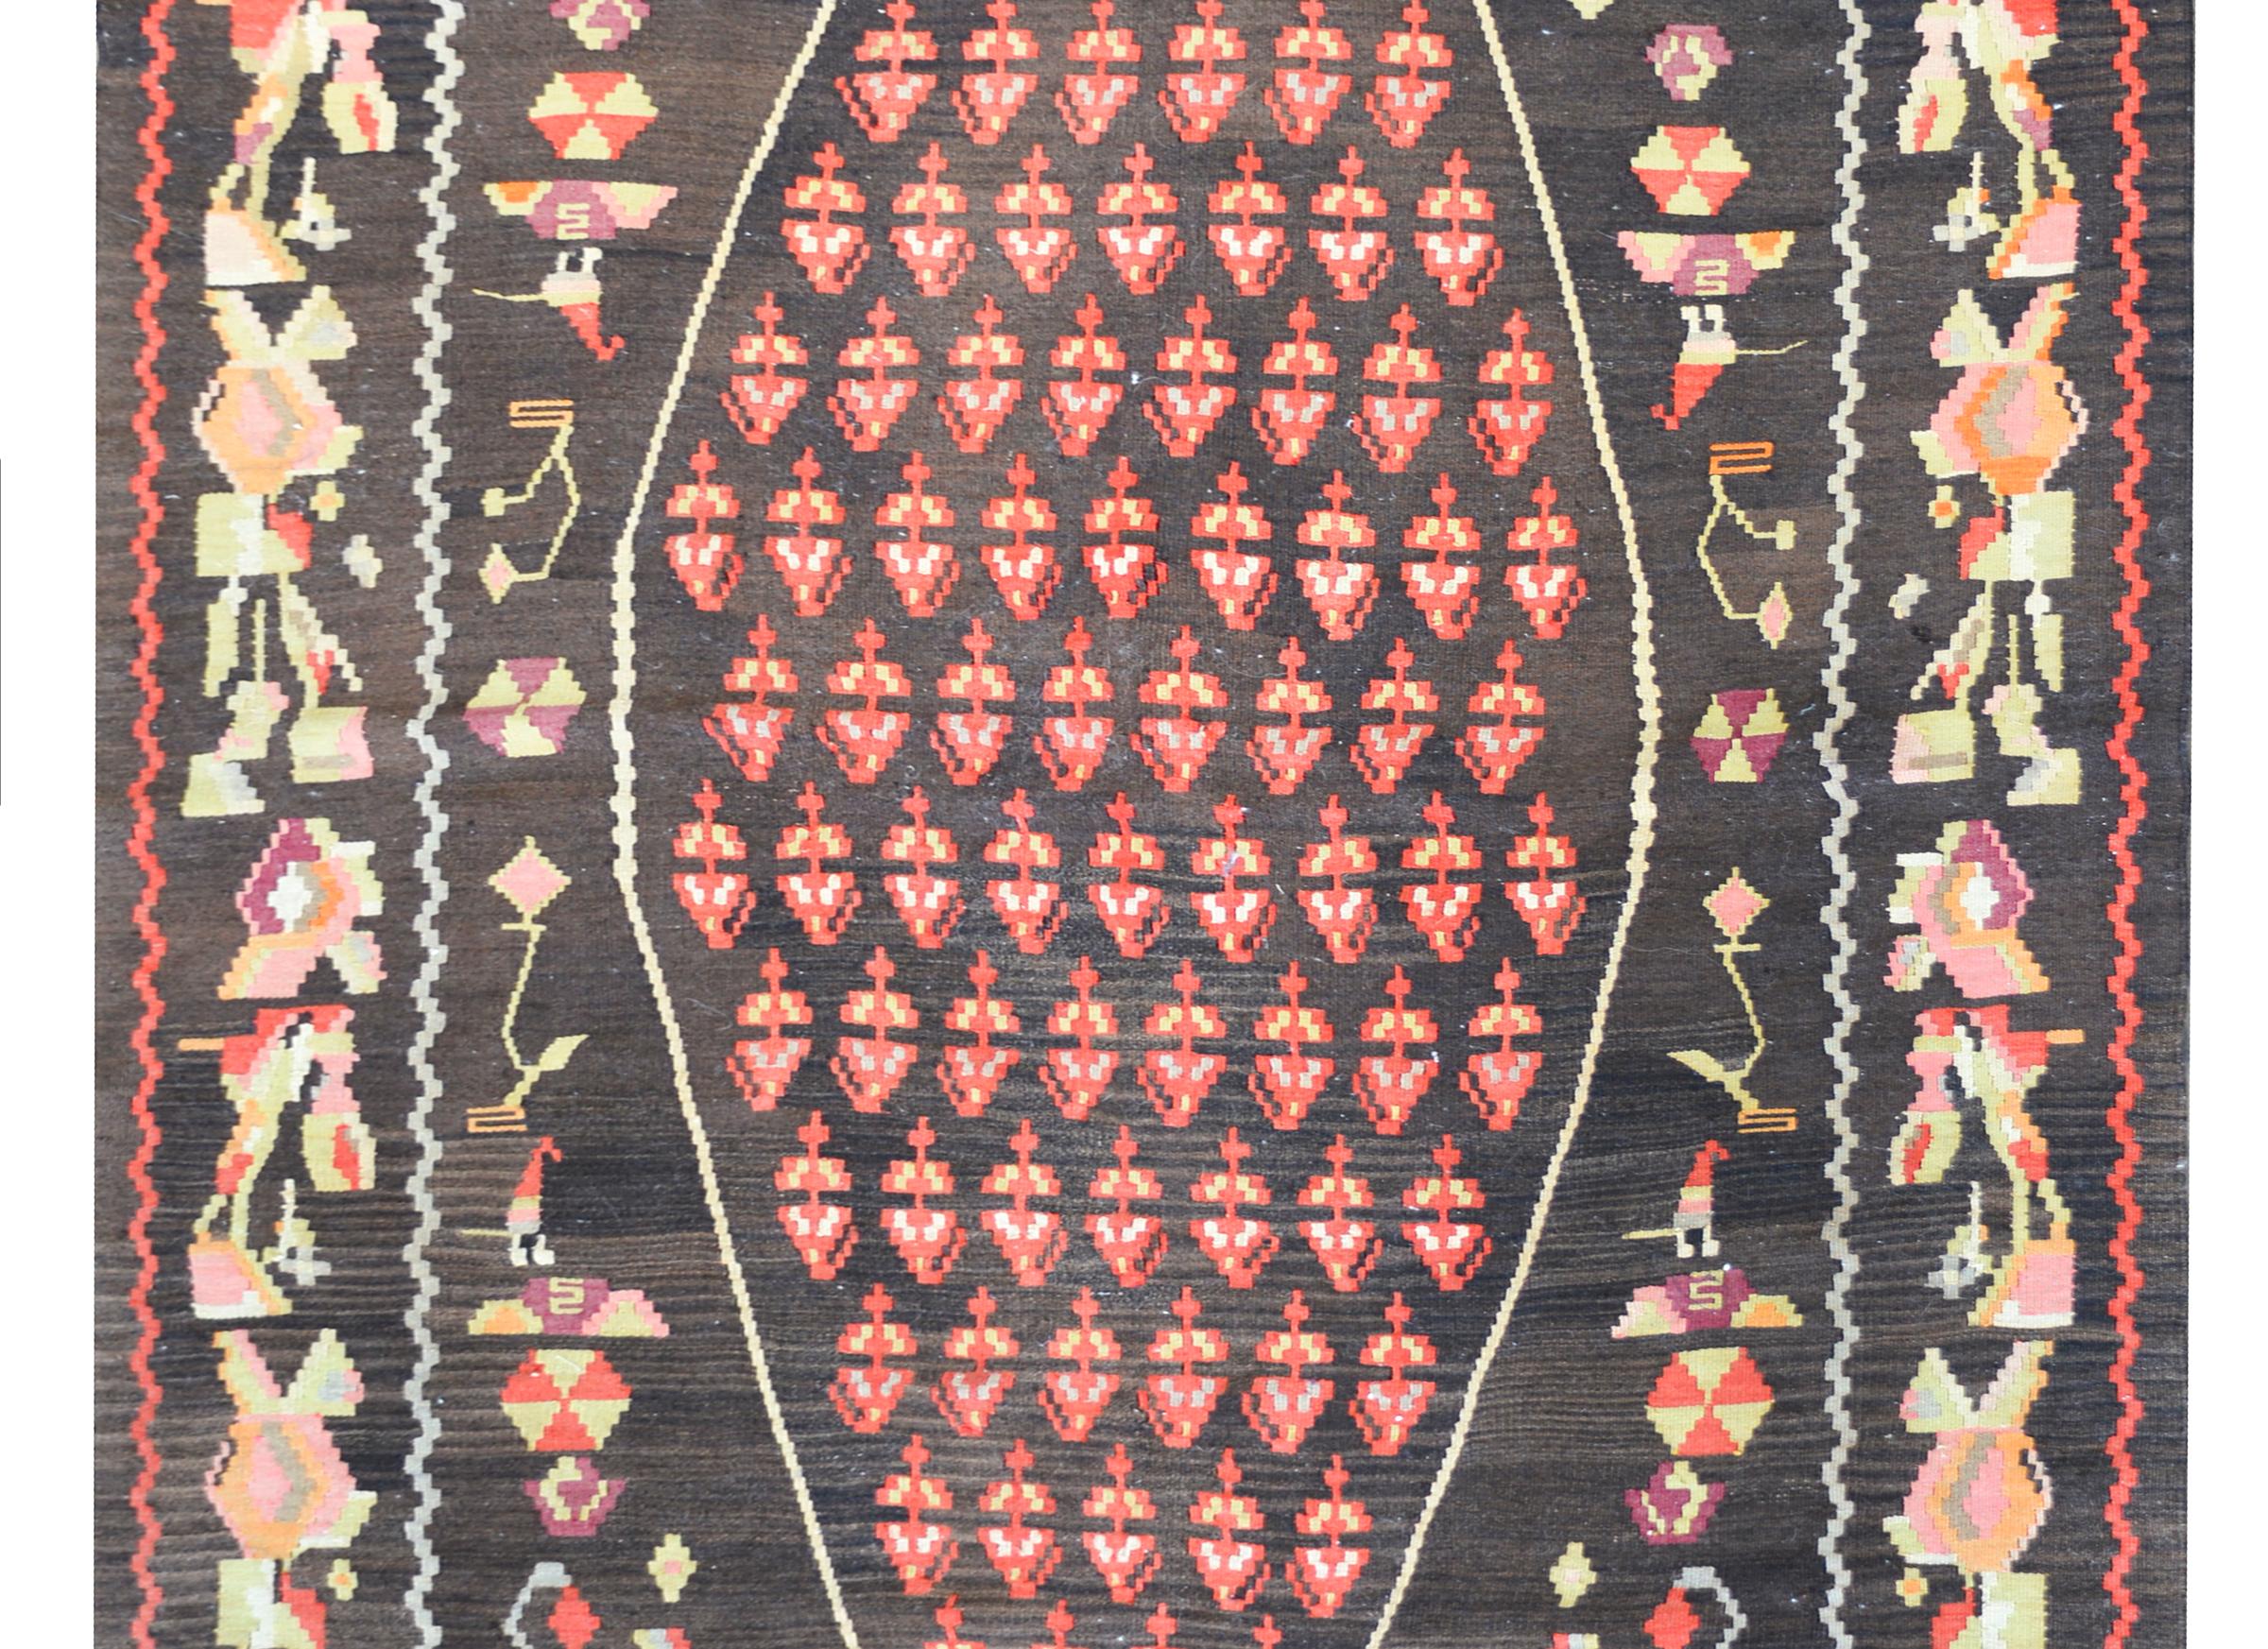 A beautiful vintage Anatolian Turkish kilim rug with a central diamond medallion with a red paisley pattern against a black background and surrounded by a stylized floral and scrolling vine pattern woven in pale greens, yellows, reds, and violets.